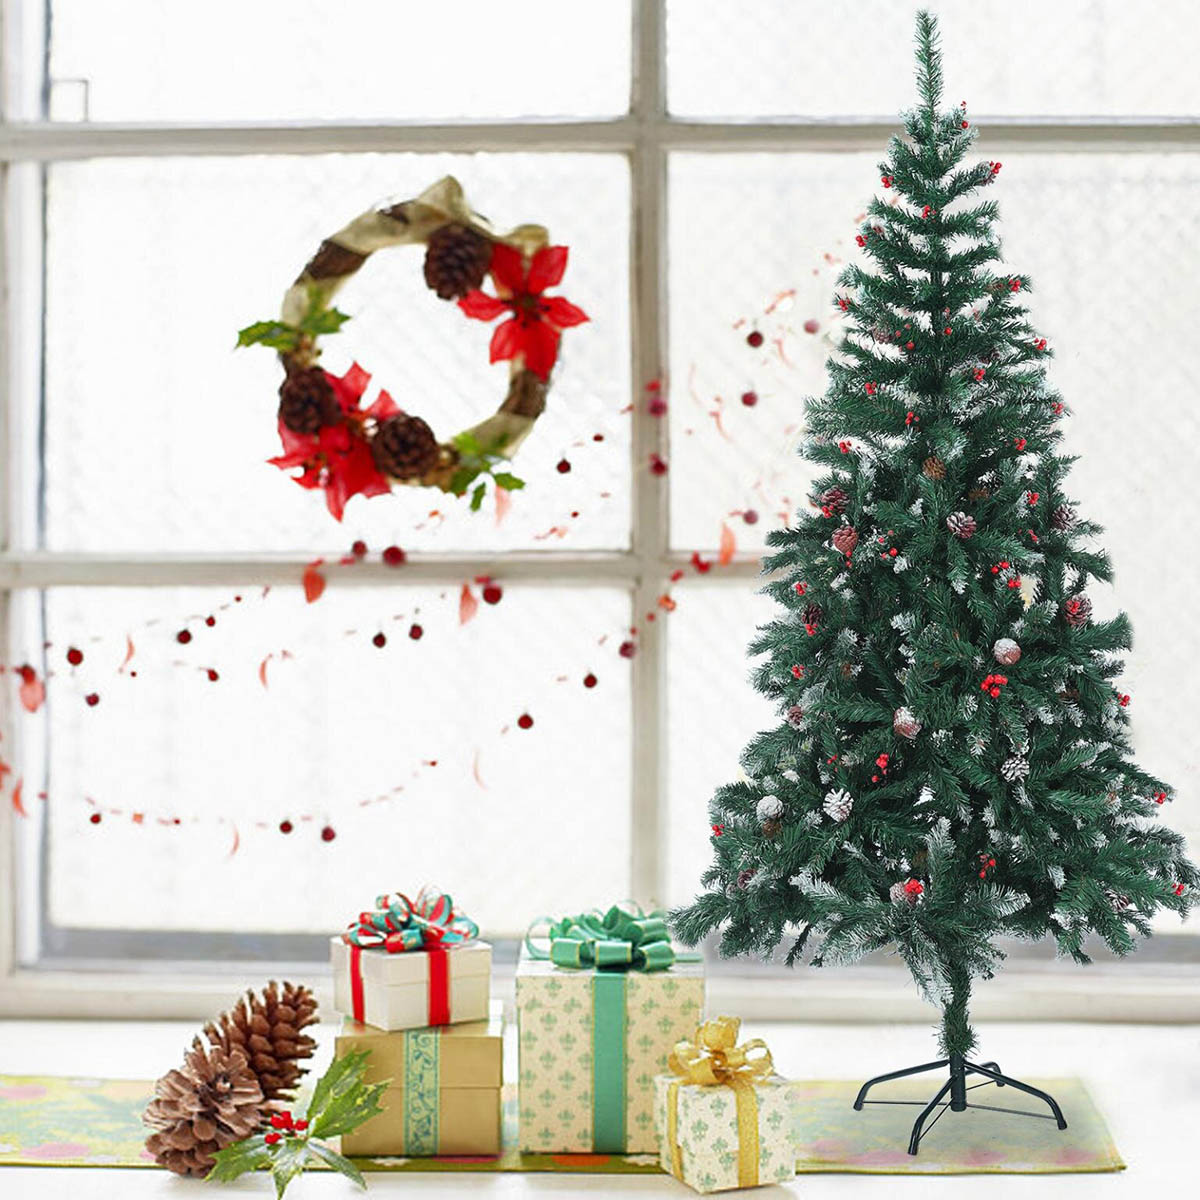 The Best Christmas Tree Delivery Service Option: Wayfair